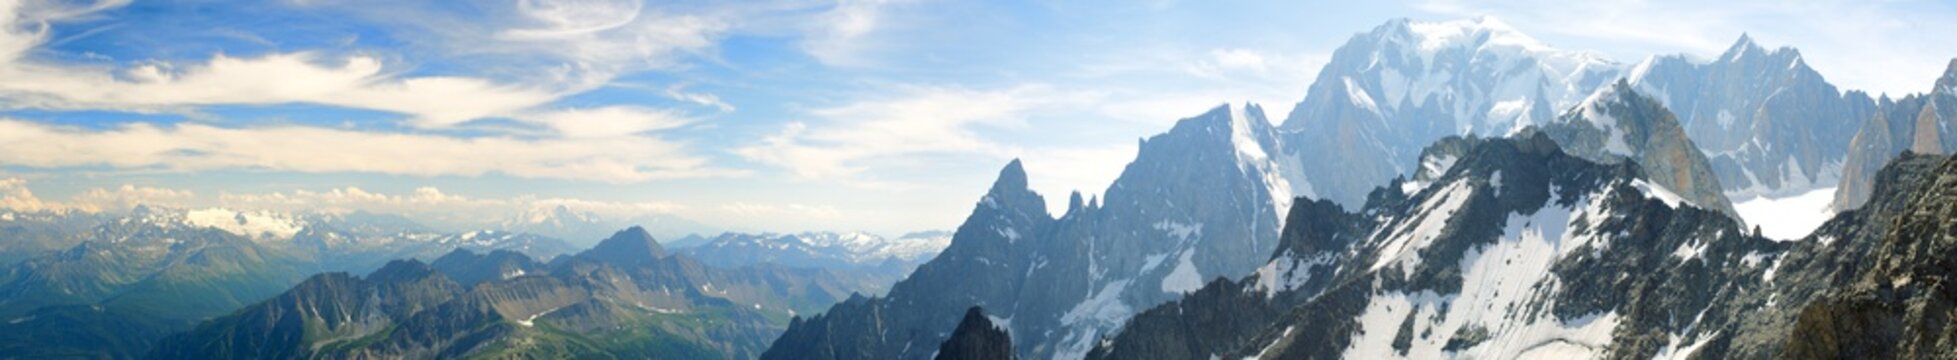 Panoramic landscape of mountain range of the Mont Blanc